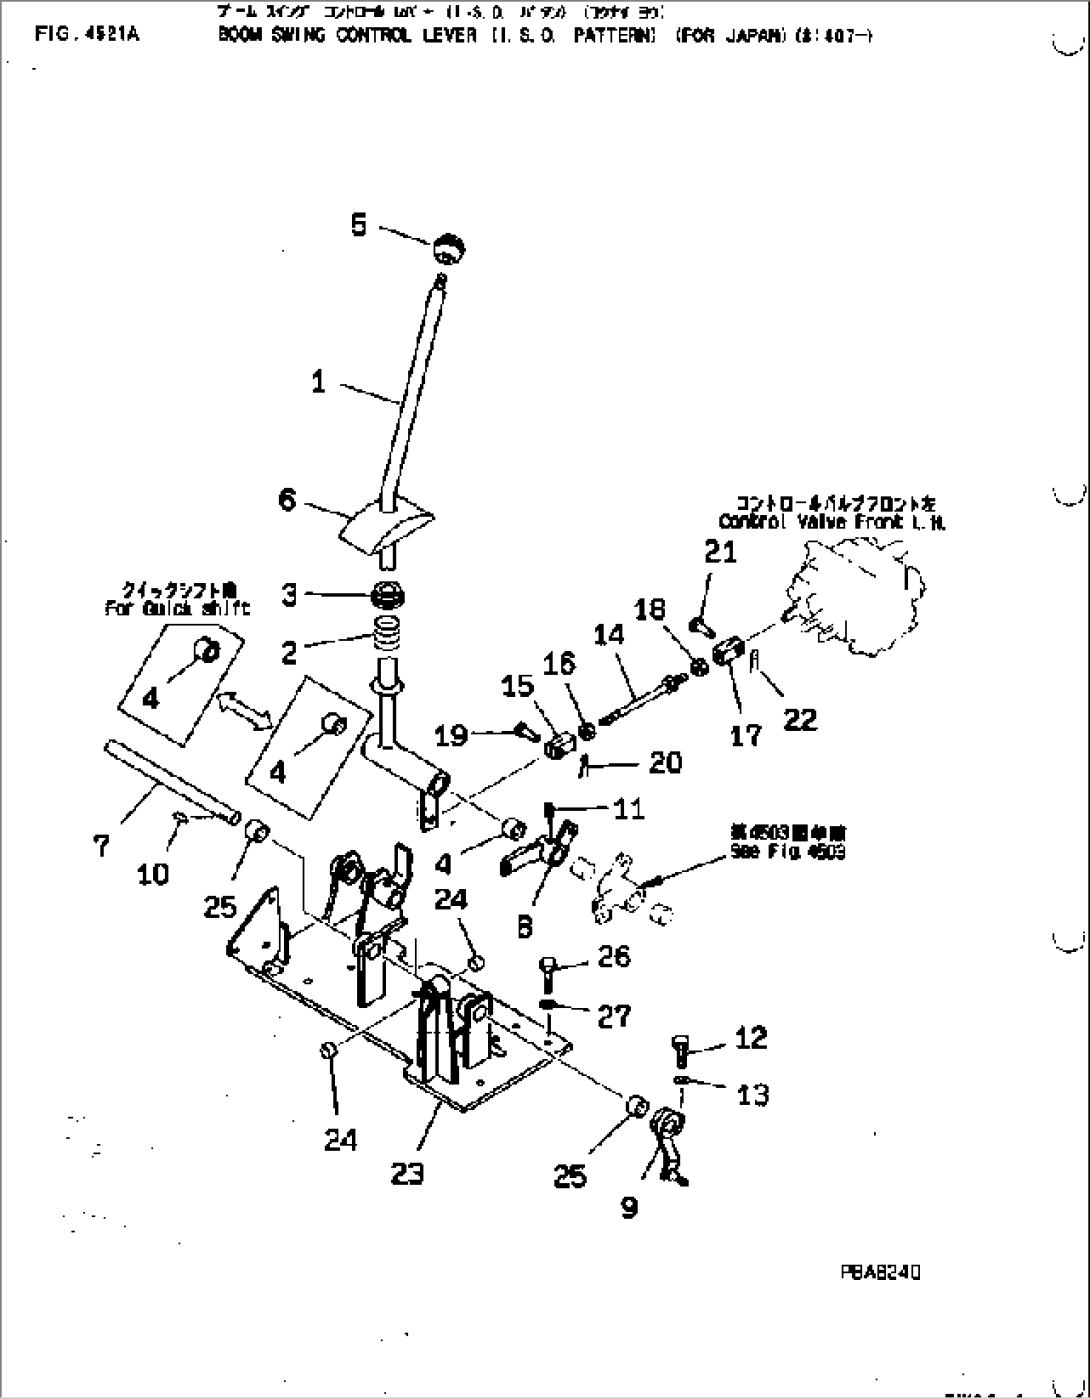 BOOM SWING CONTROL LEVER (I.S.O. PATTERN) (FOR JAPAN)(#1758-)